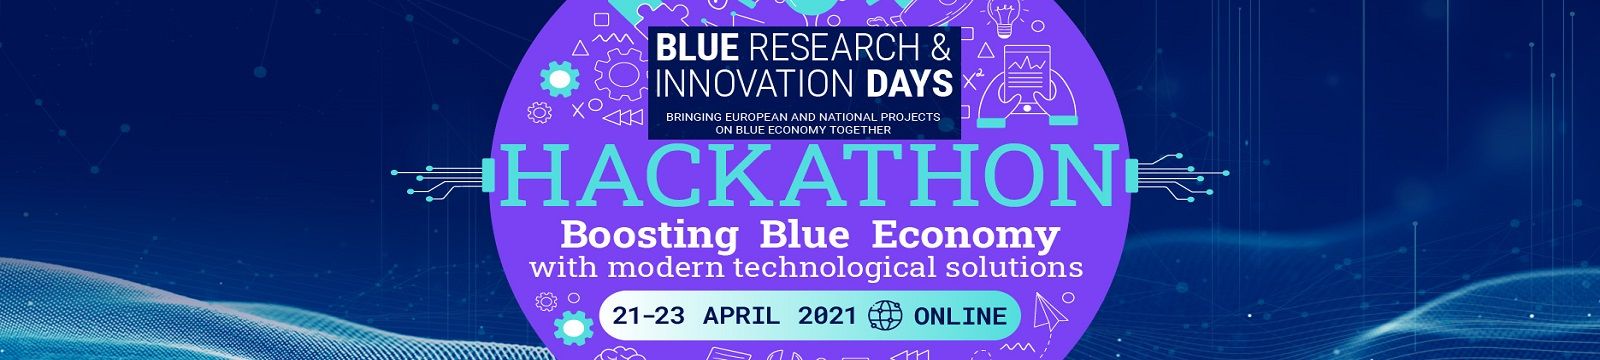 Blue Research and Innovation Days, evento online 19-23 aprile 2021